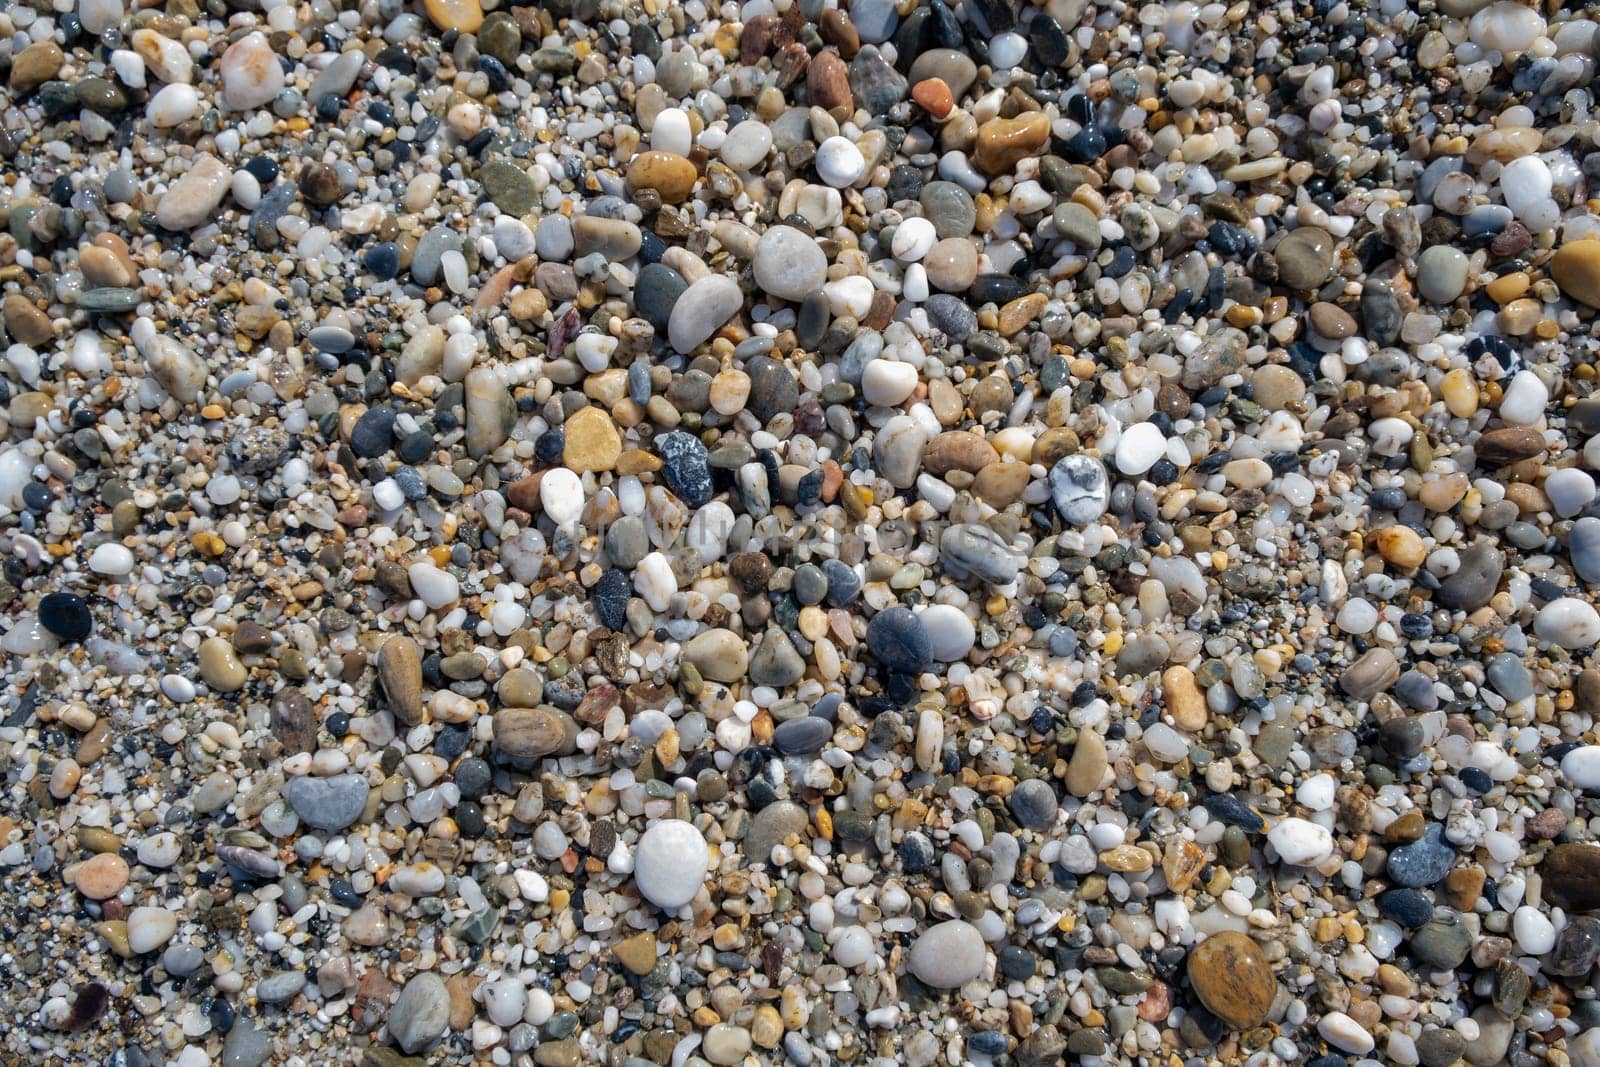 Crushed stone on the seashore. Selective focus on object. The stones were laid on the ground in the garden as a background. Background blur. Pebble stones background.